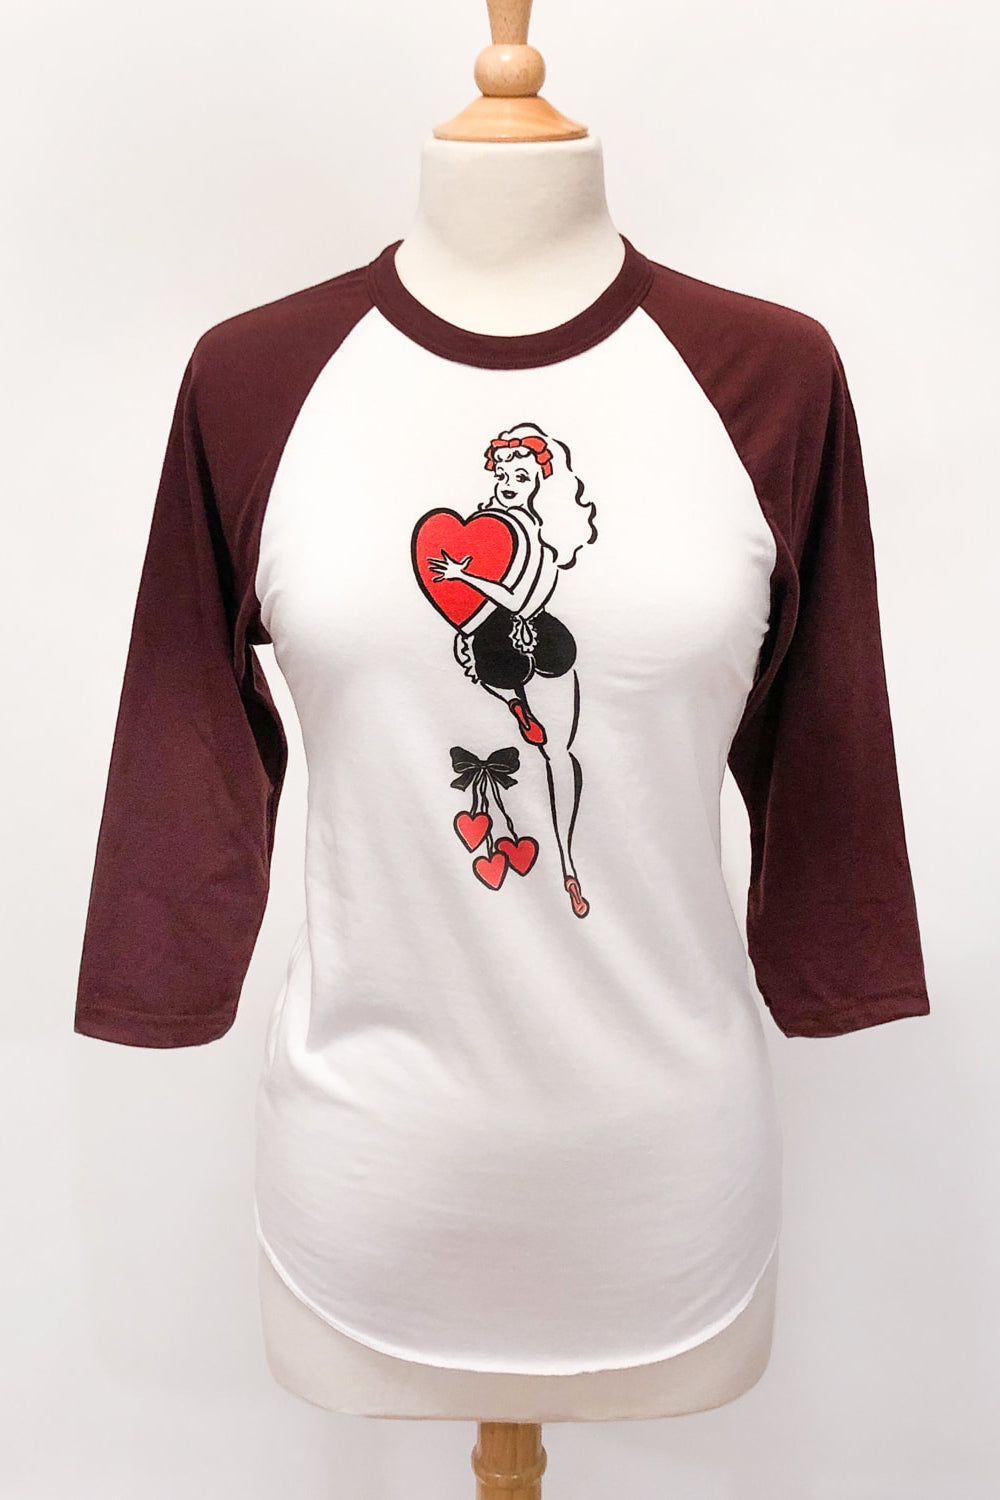 Hold on to Your Heart Unisex Raglan (Last One)